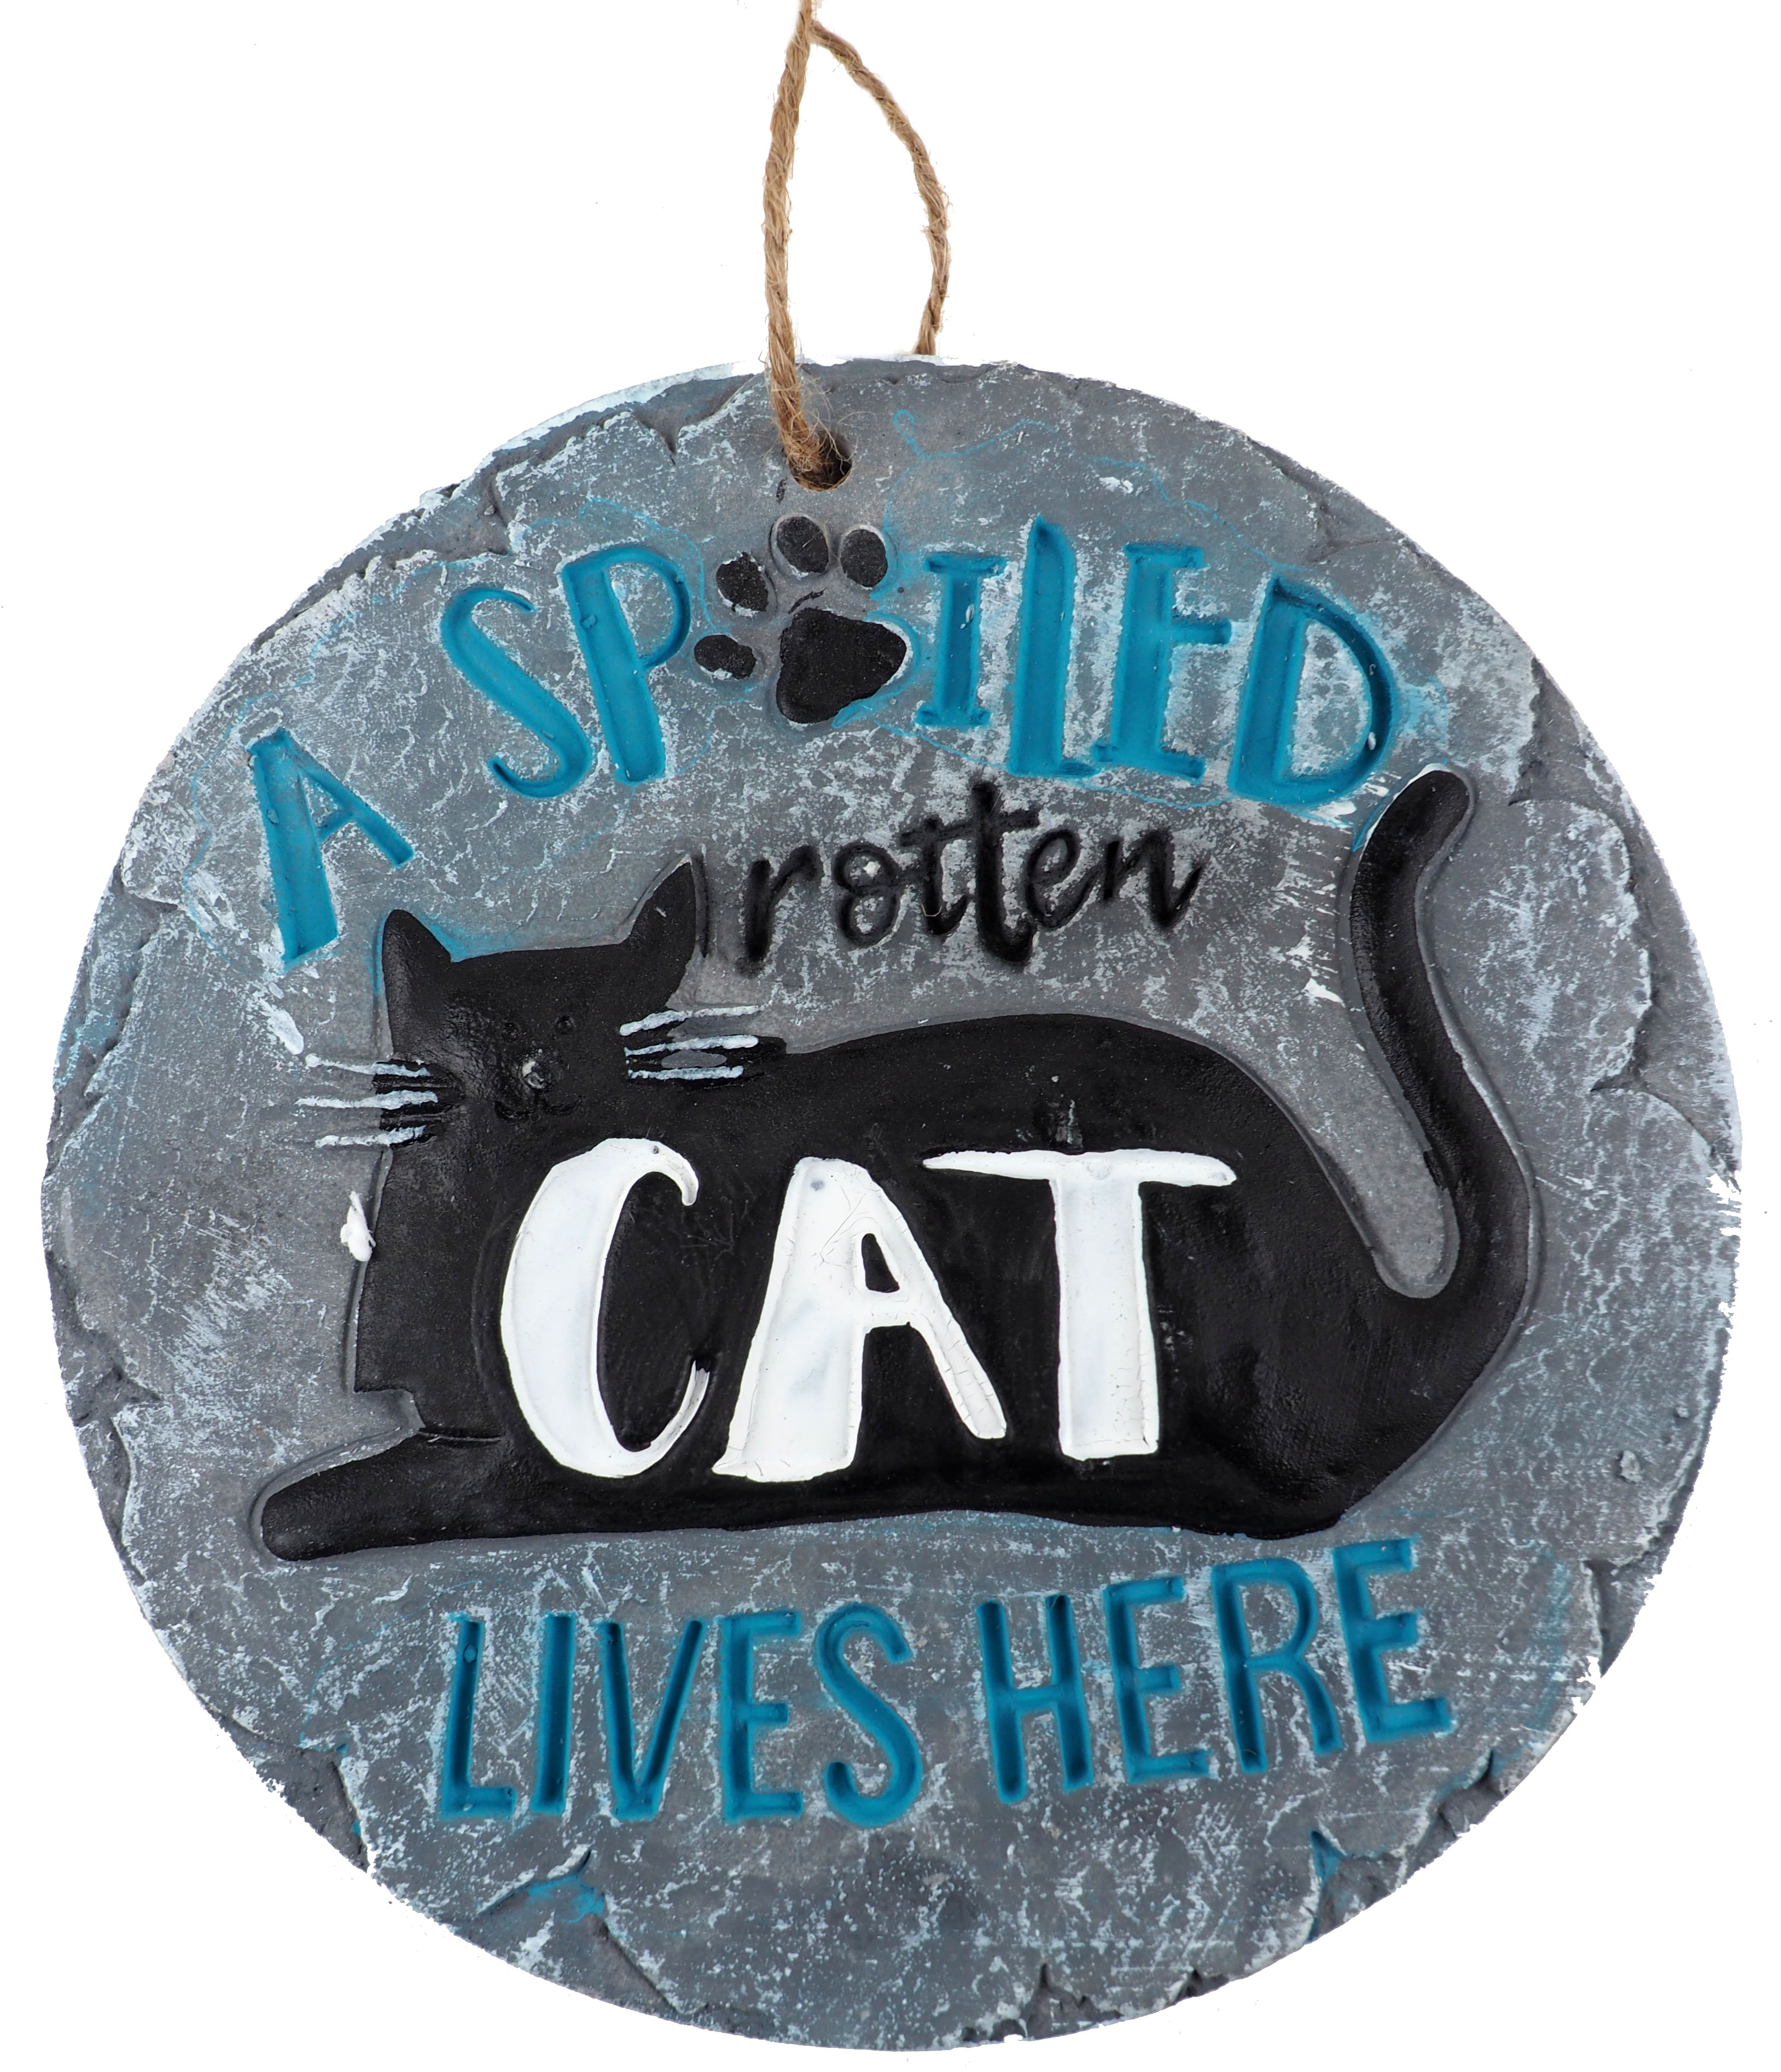 Hanging Garden Quote 16cm Round Plaques - Spoiled Rotten Cat Lives Here